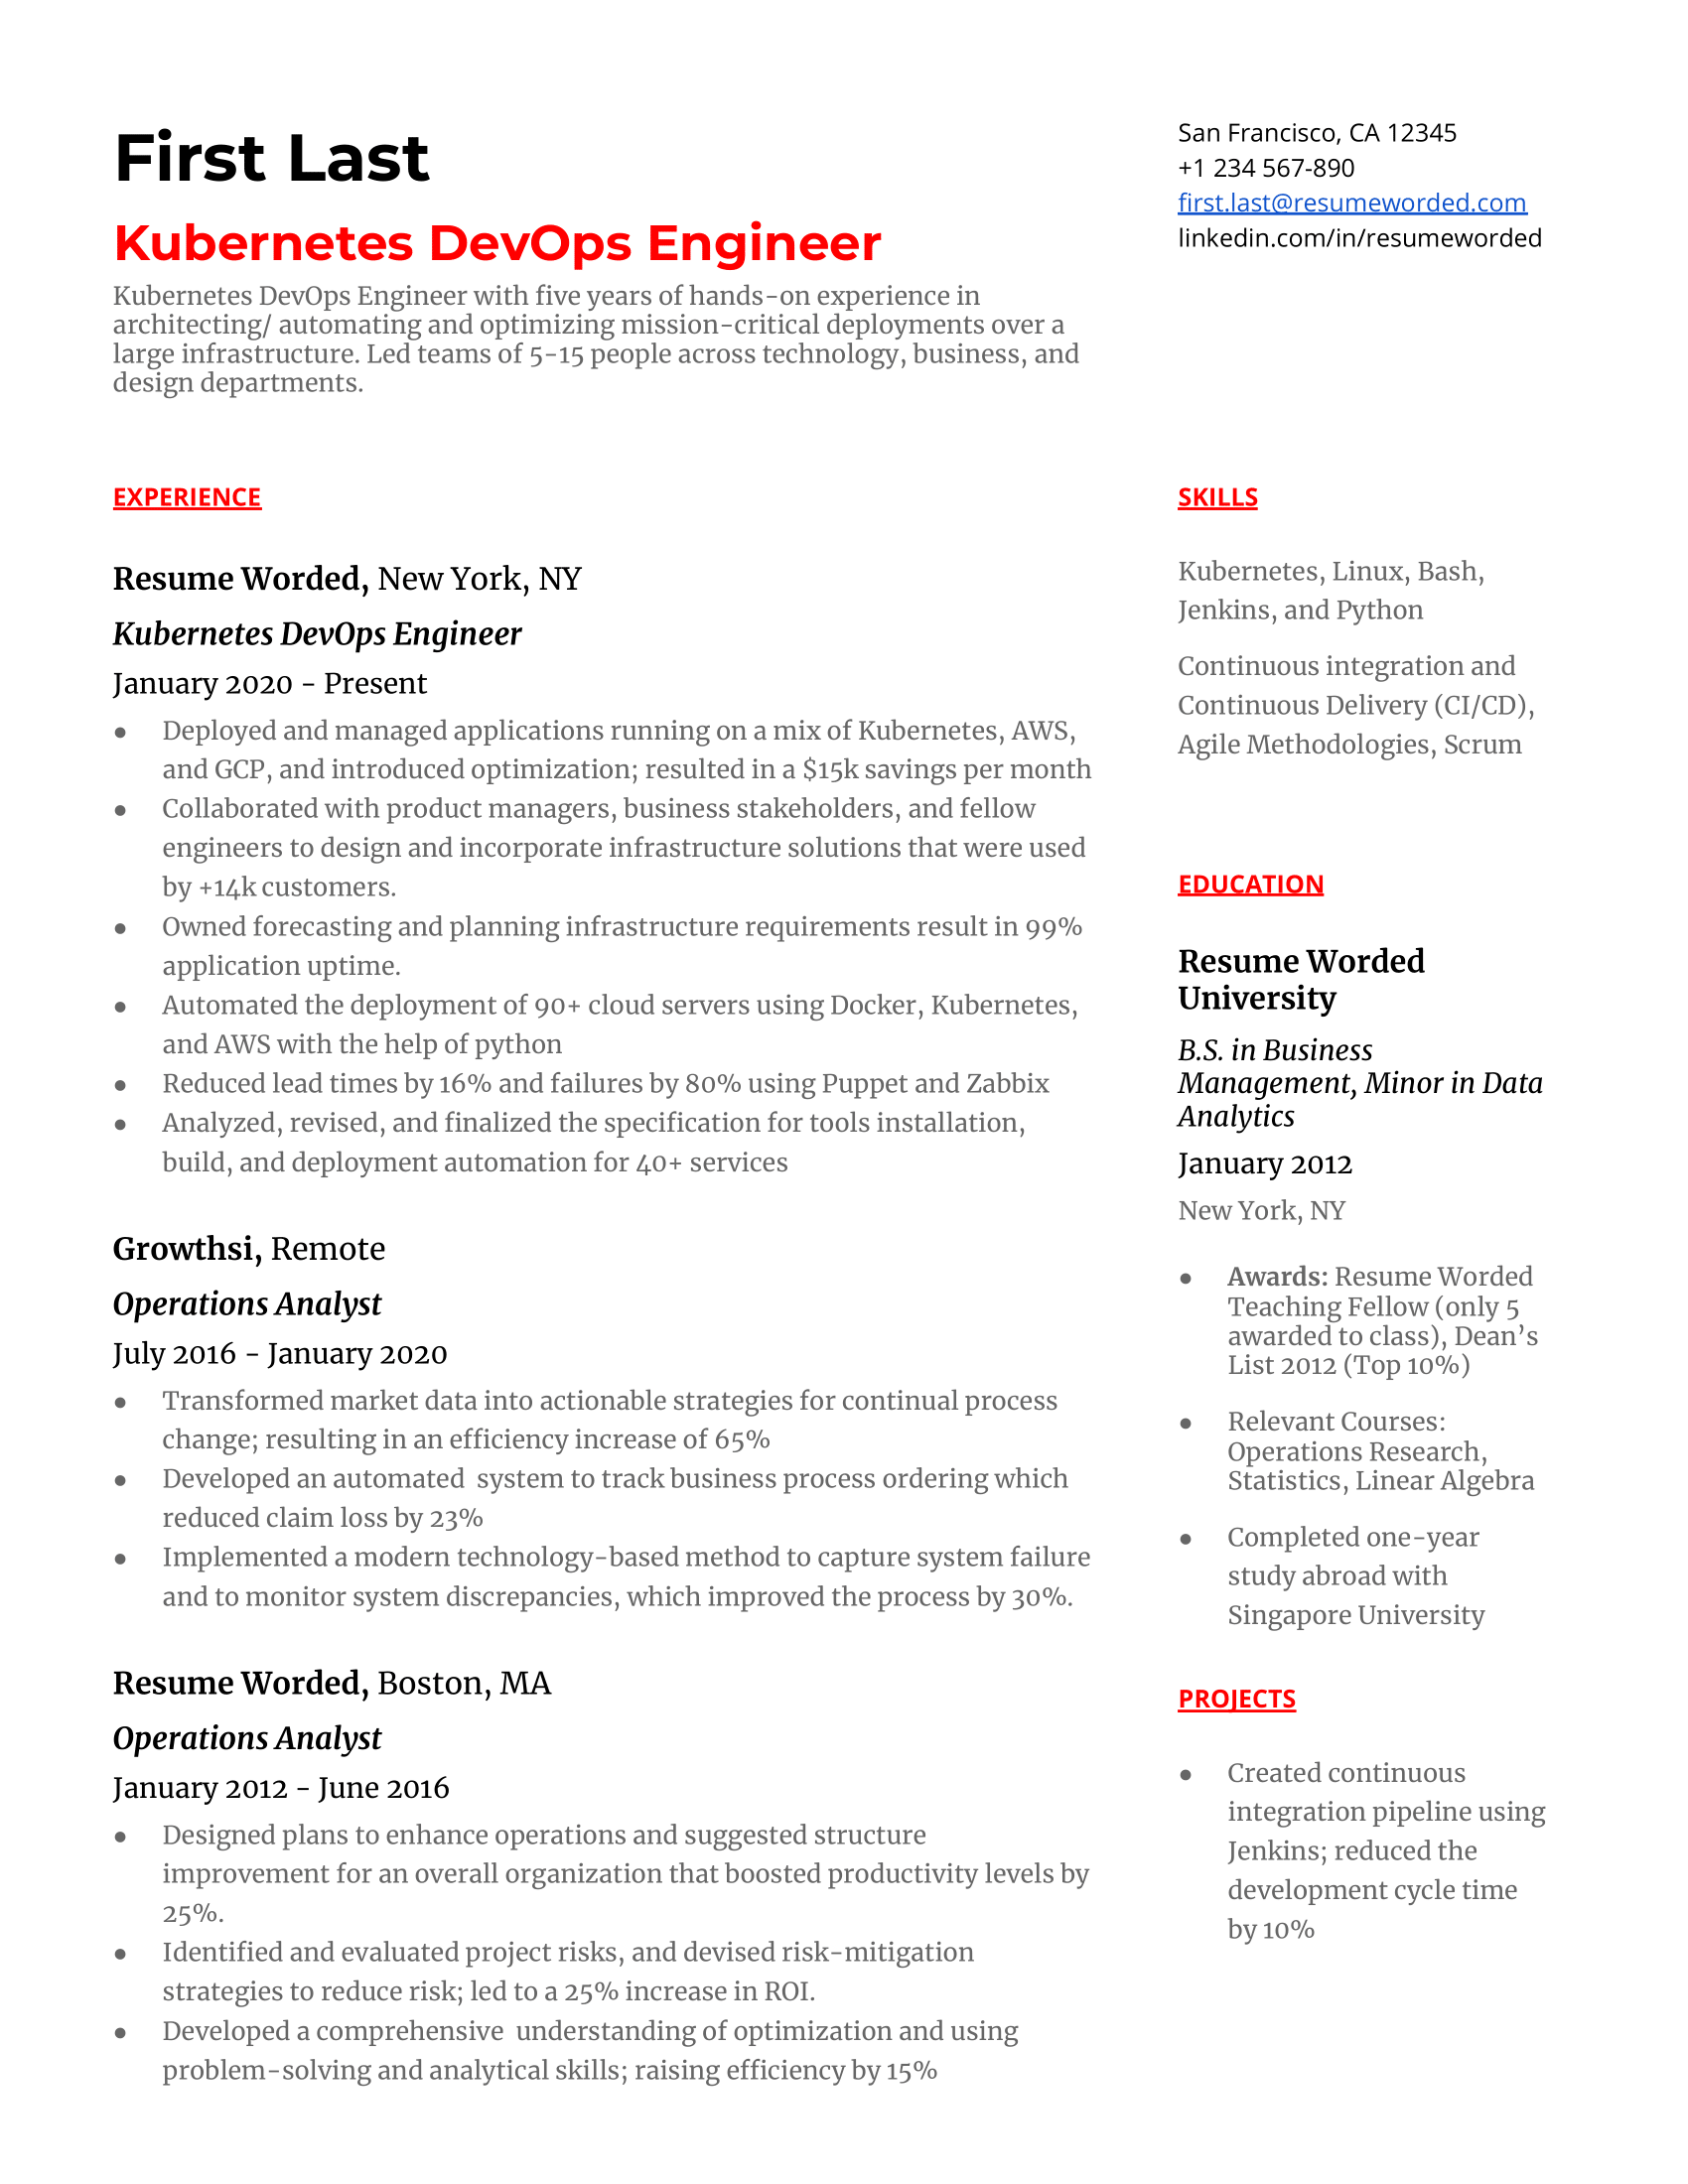 A Kubernetes DevOps engineer resume template including web service tools and programming skills.